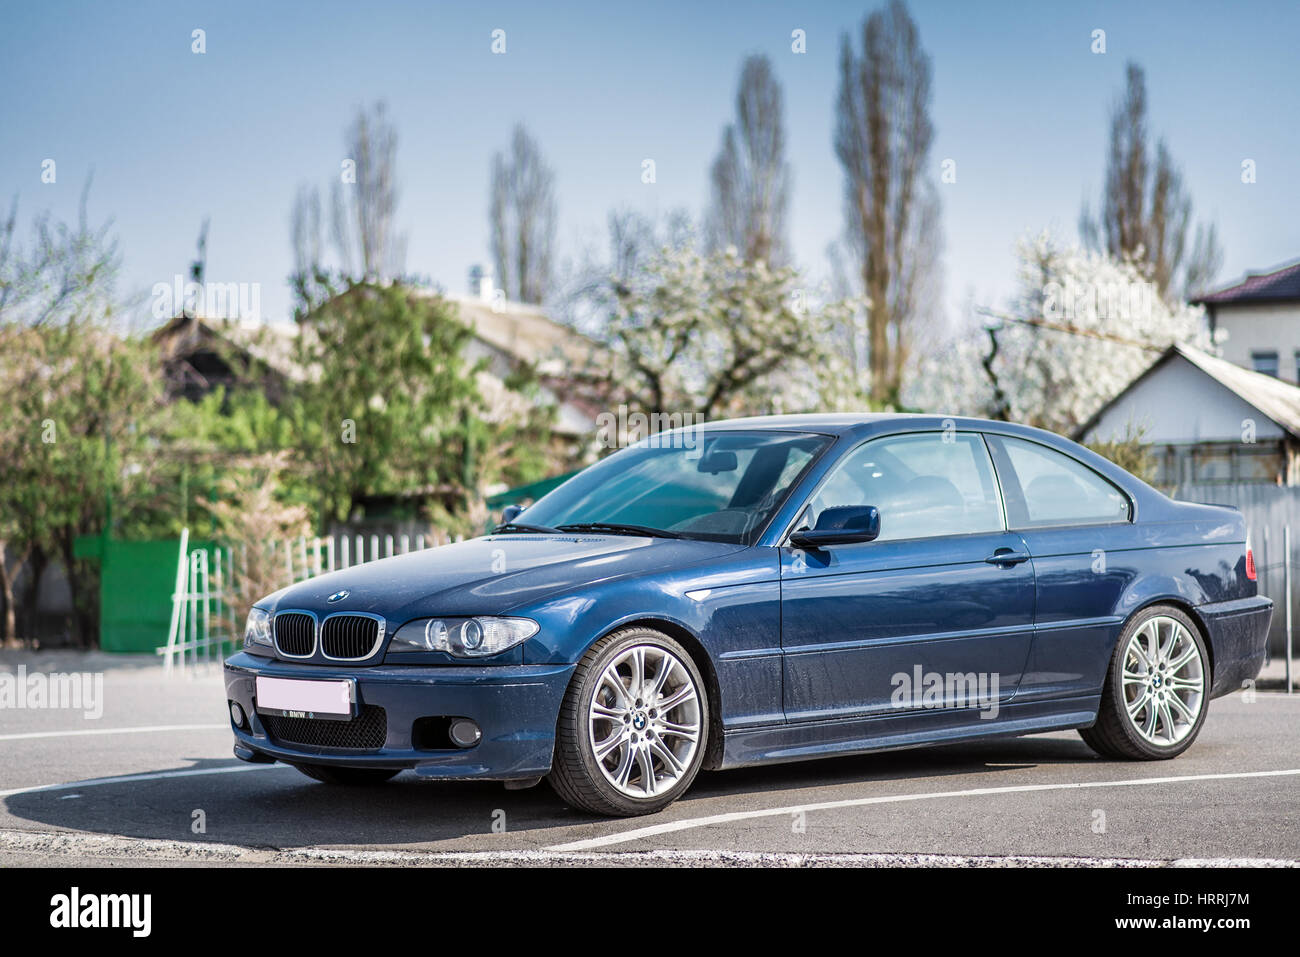 BMW 3-series sports car, with body tuning, production years ca. 1984-1991  Stock Photo - Alamy